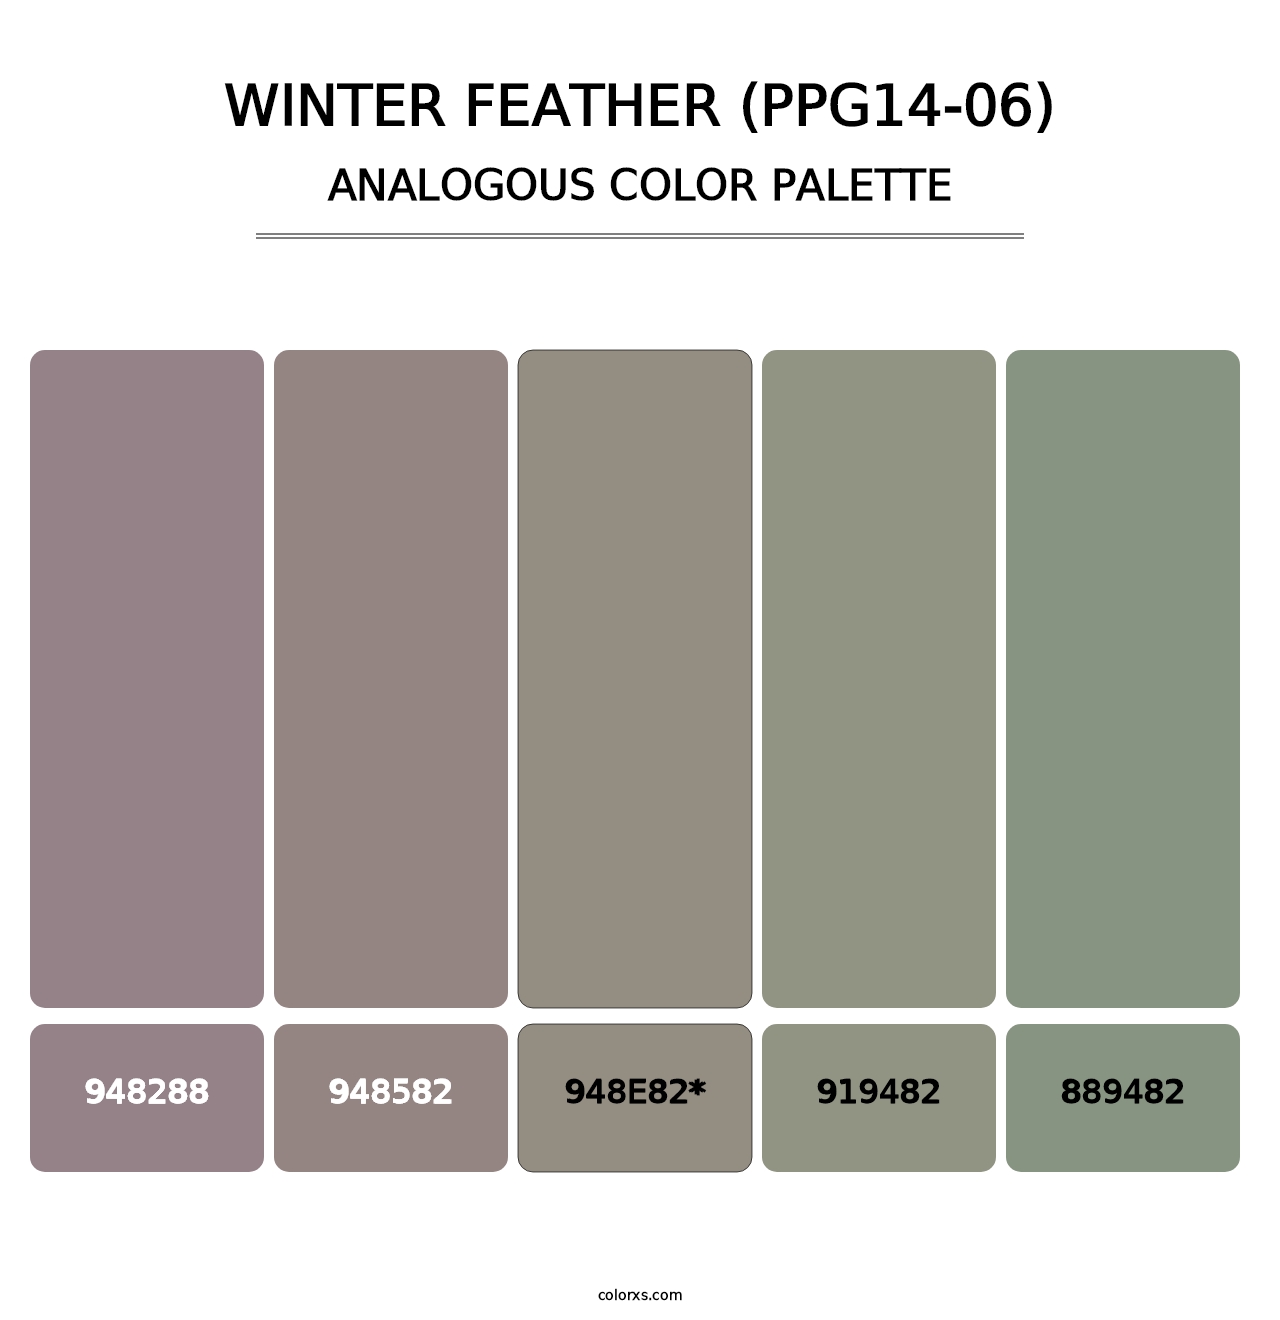 Winter Feather (PPG14-06) - Analogous Color Palette